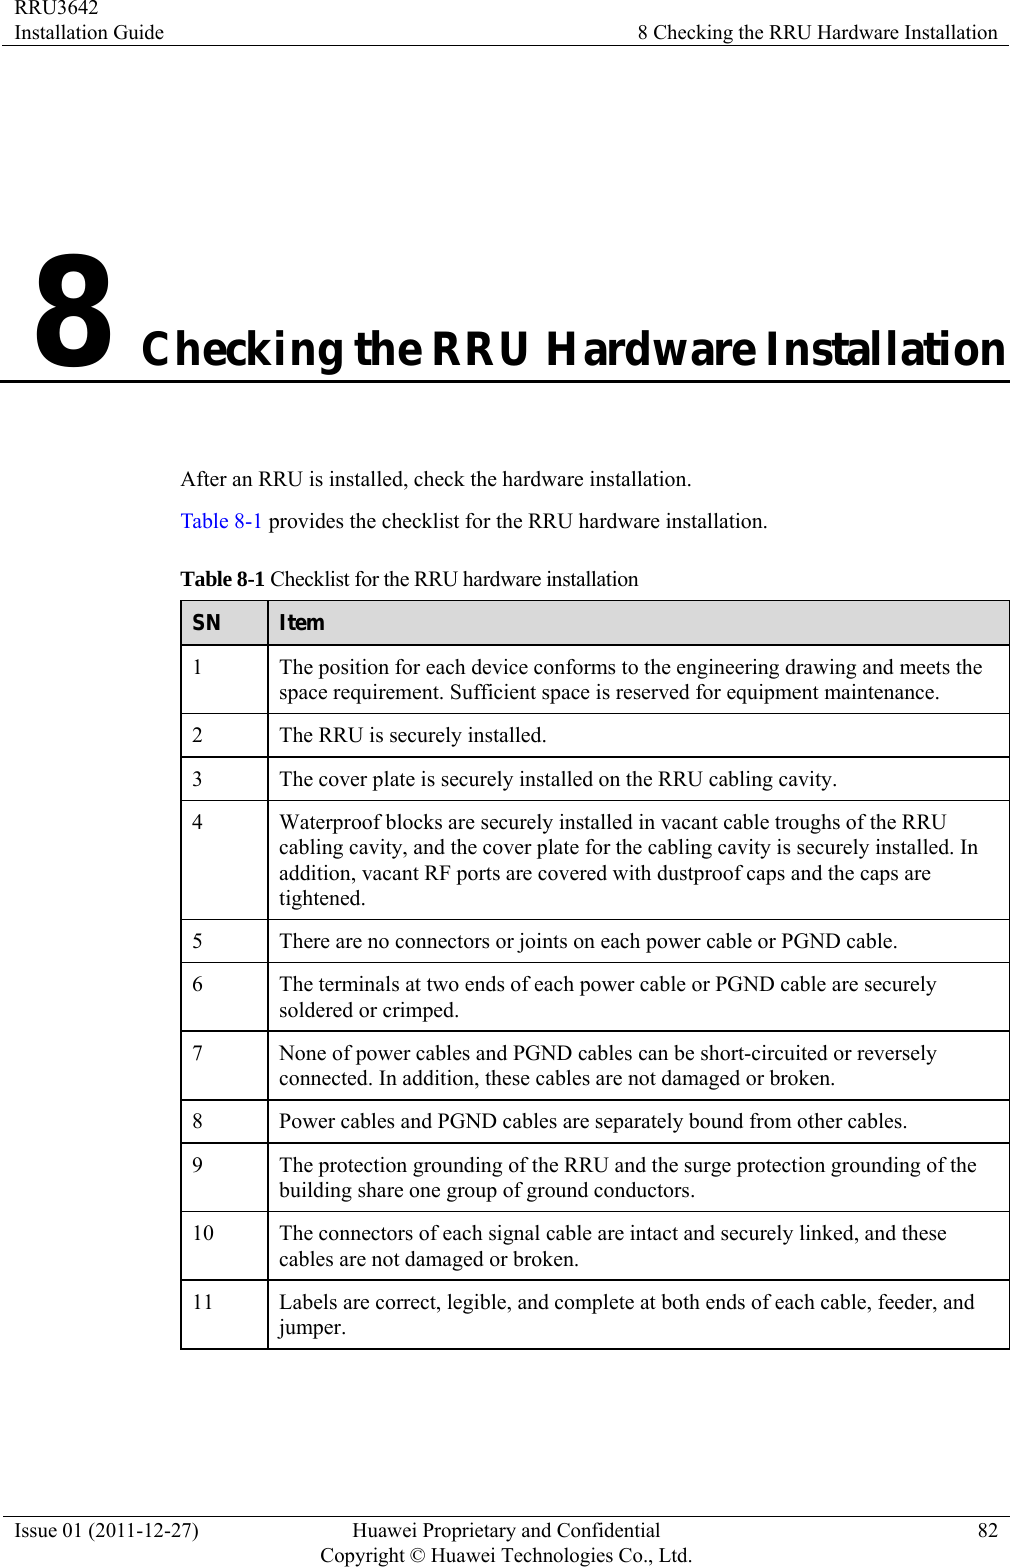 RRU3642 Installation Guide  8 Checking the RRU Hardware Installation Issue 01 (2011-12-27)  Huawei Proprietary and Confidential         Copyright © Huawei Technologies Co., Ltd.82 8 Checking the RRU Hardware Installation After an RRU is installed, check the hardware installation.   Table 8-1 provides the checklist for the RRU hardware installation. Table 8-1 Checklist for the RRU hardware installation SN  Item 1  The position for each device conforms to the engineering drawing and meets the space requirement. Sufficient space is reserved for equipment maintenance.   2  The RRU is securely installed. 3  The cover plate is securely installed on the RRU cabling cavity.   4  Waterproof blocks are securely installed in vacant cable troughs of the RRU cabling cavity, and the cover plate for the cabling cavity is securely installed. In addition, vacant RF ports are covered with dustproof caps and the caps are tightened. 5  There are no connectors or joints on each power cable or PGND cable.   6  The terminals at two ends of each power cable or PGND cable are securely soldered or crimped. 7  None of power cables and PGND cables can be short-circuited or reversely connected. In addition, these cables are not damaged or broken. 8  Power cables and PGND cables are separately bound from other cables.   9  The protection grounding of the RRU and the surge protection grounding of the building share one group of ground conductors. 10  The connectors of each signal cable are intact and securely linked, and these cables are not damaged or broken. 11  Labels are correct, legible, and complete at both ends of each cable, feeder, and jumper. 